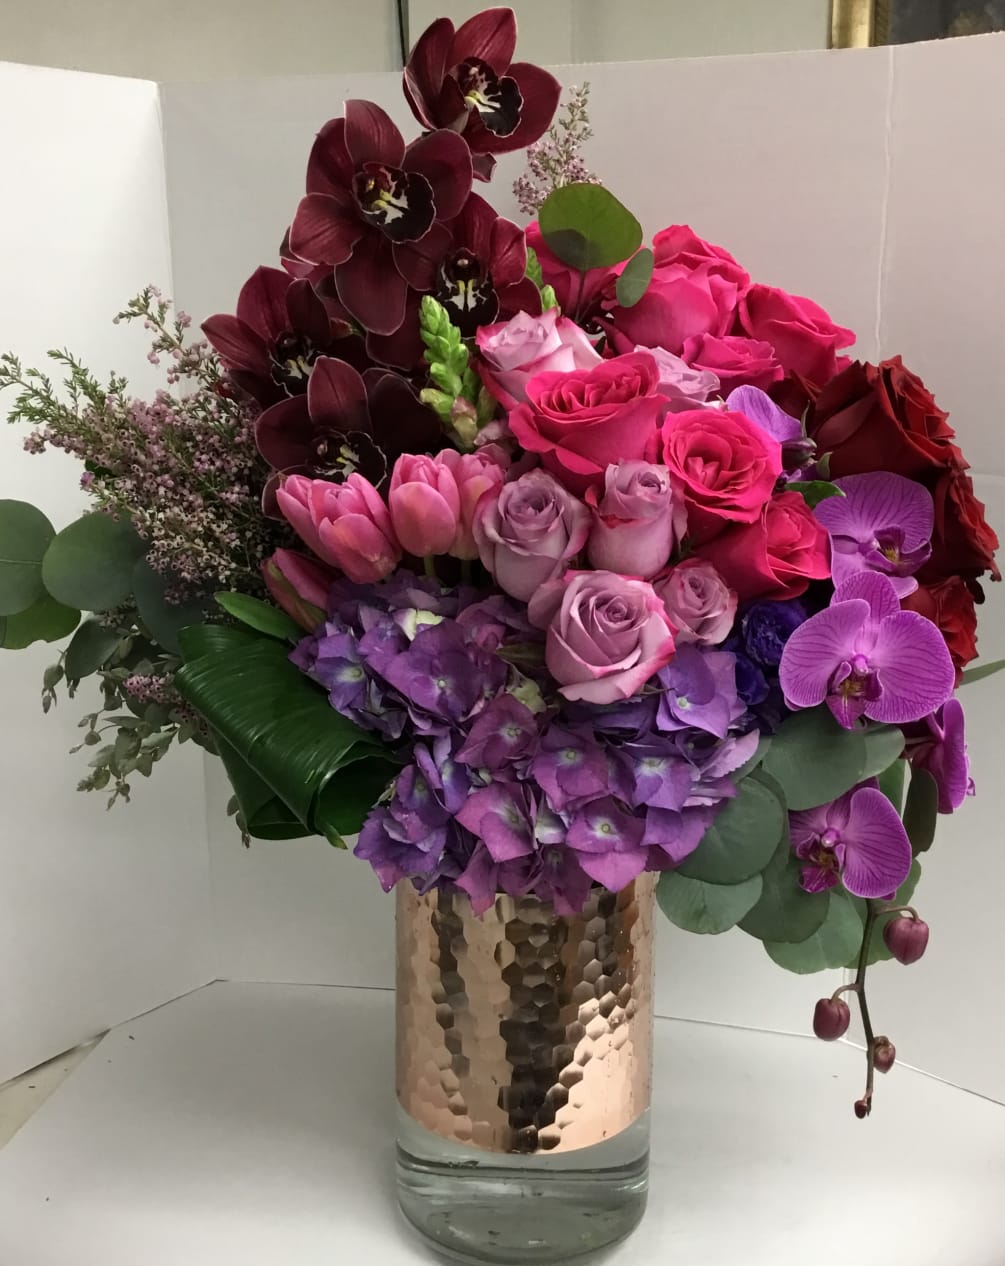 Send expressions of eternal love with his stunning arrangement. Lush with royal